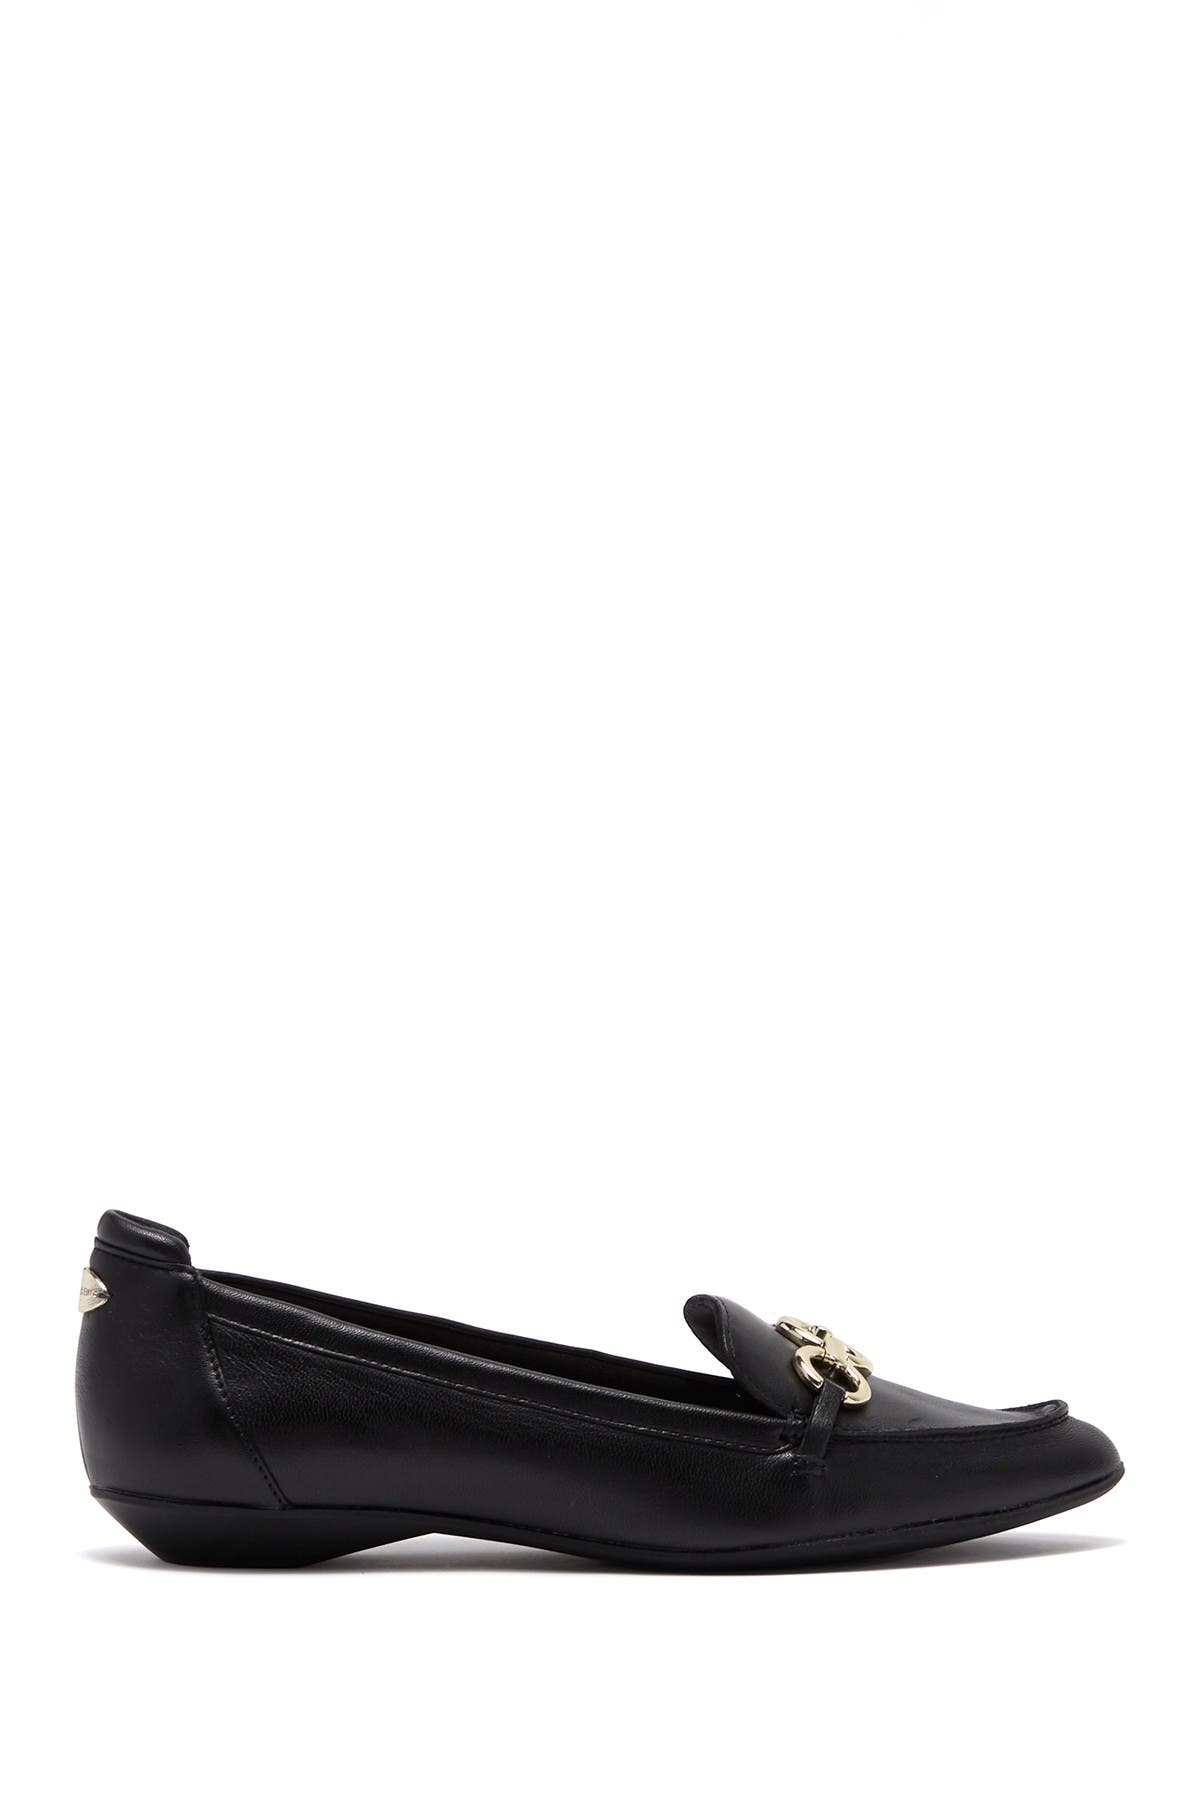 Anne Klein | Ola Pointed Toe Leather Loafer | Nordstrom Rack